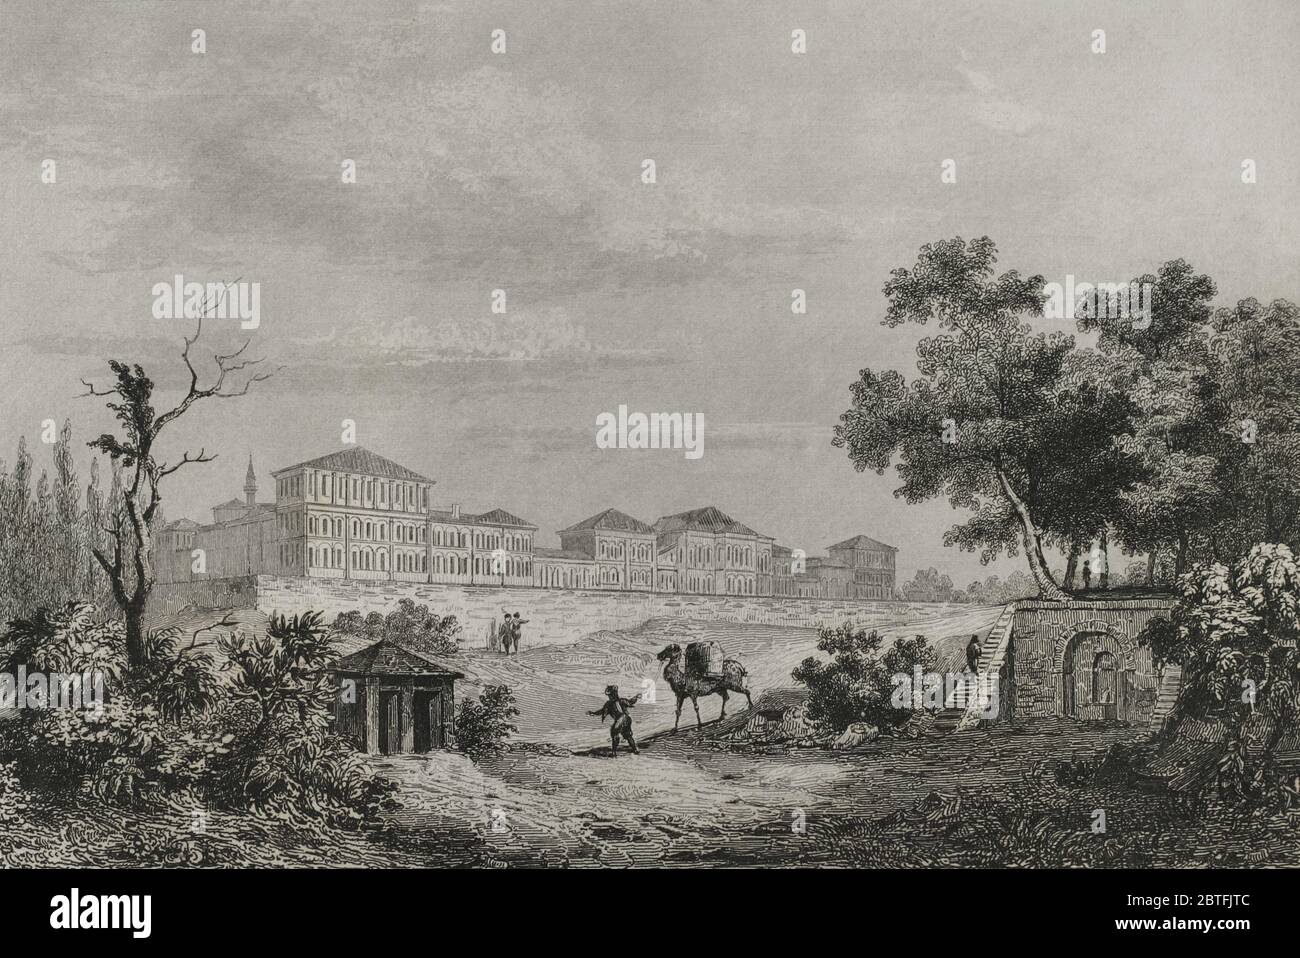 Ottoman Empire. Turkey. Beyoglu. Burial ground or Champs des Morts Barracks at Pera. Engraving by Lemaitre and Blanchard. Historia de Turquia by Joseph Marie Jouannin (1783-1844) and Jules Van Gaver, 1840. Stock Photo